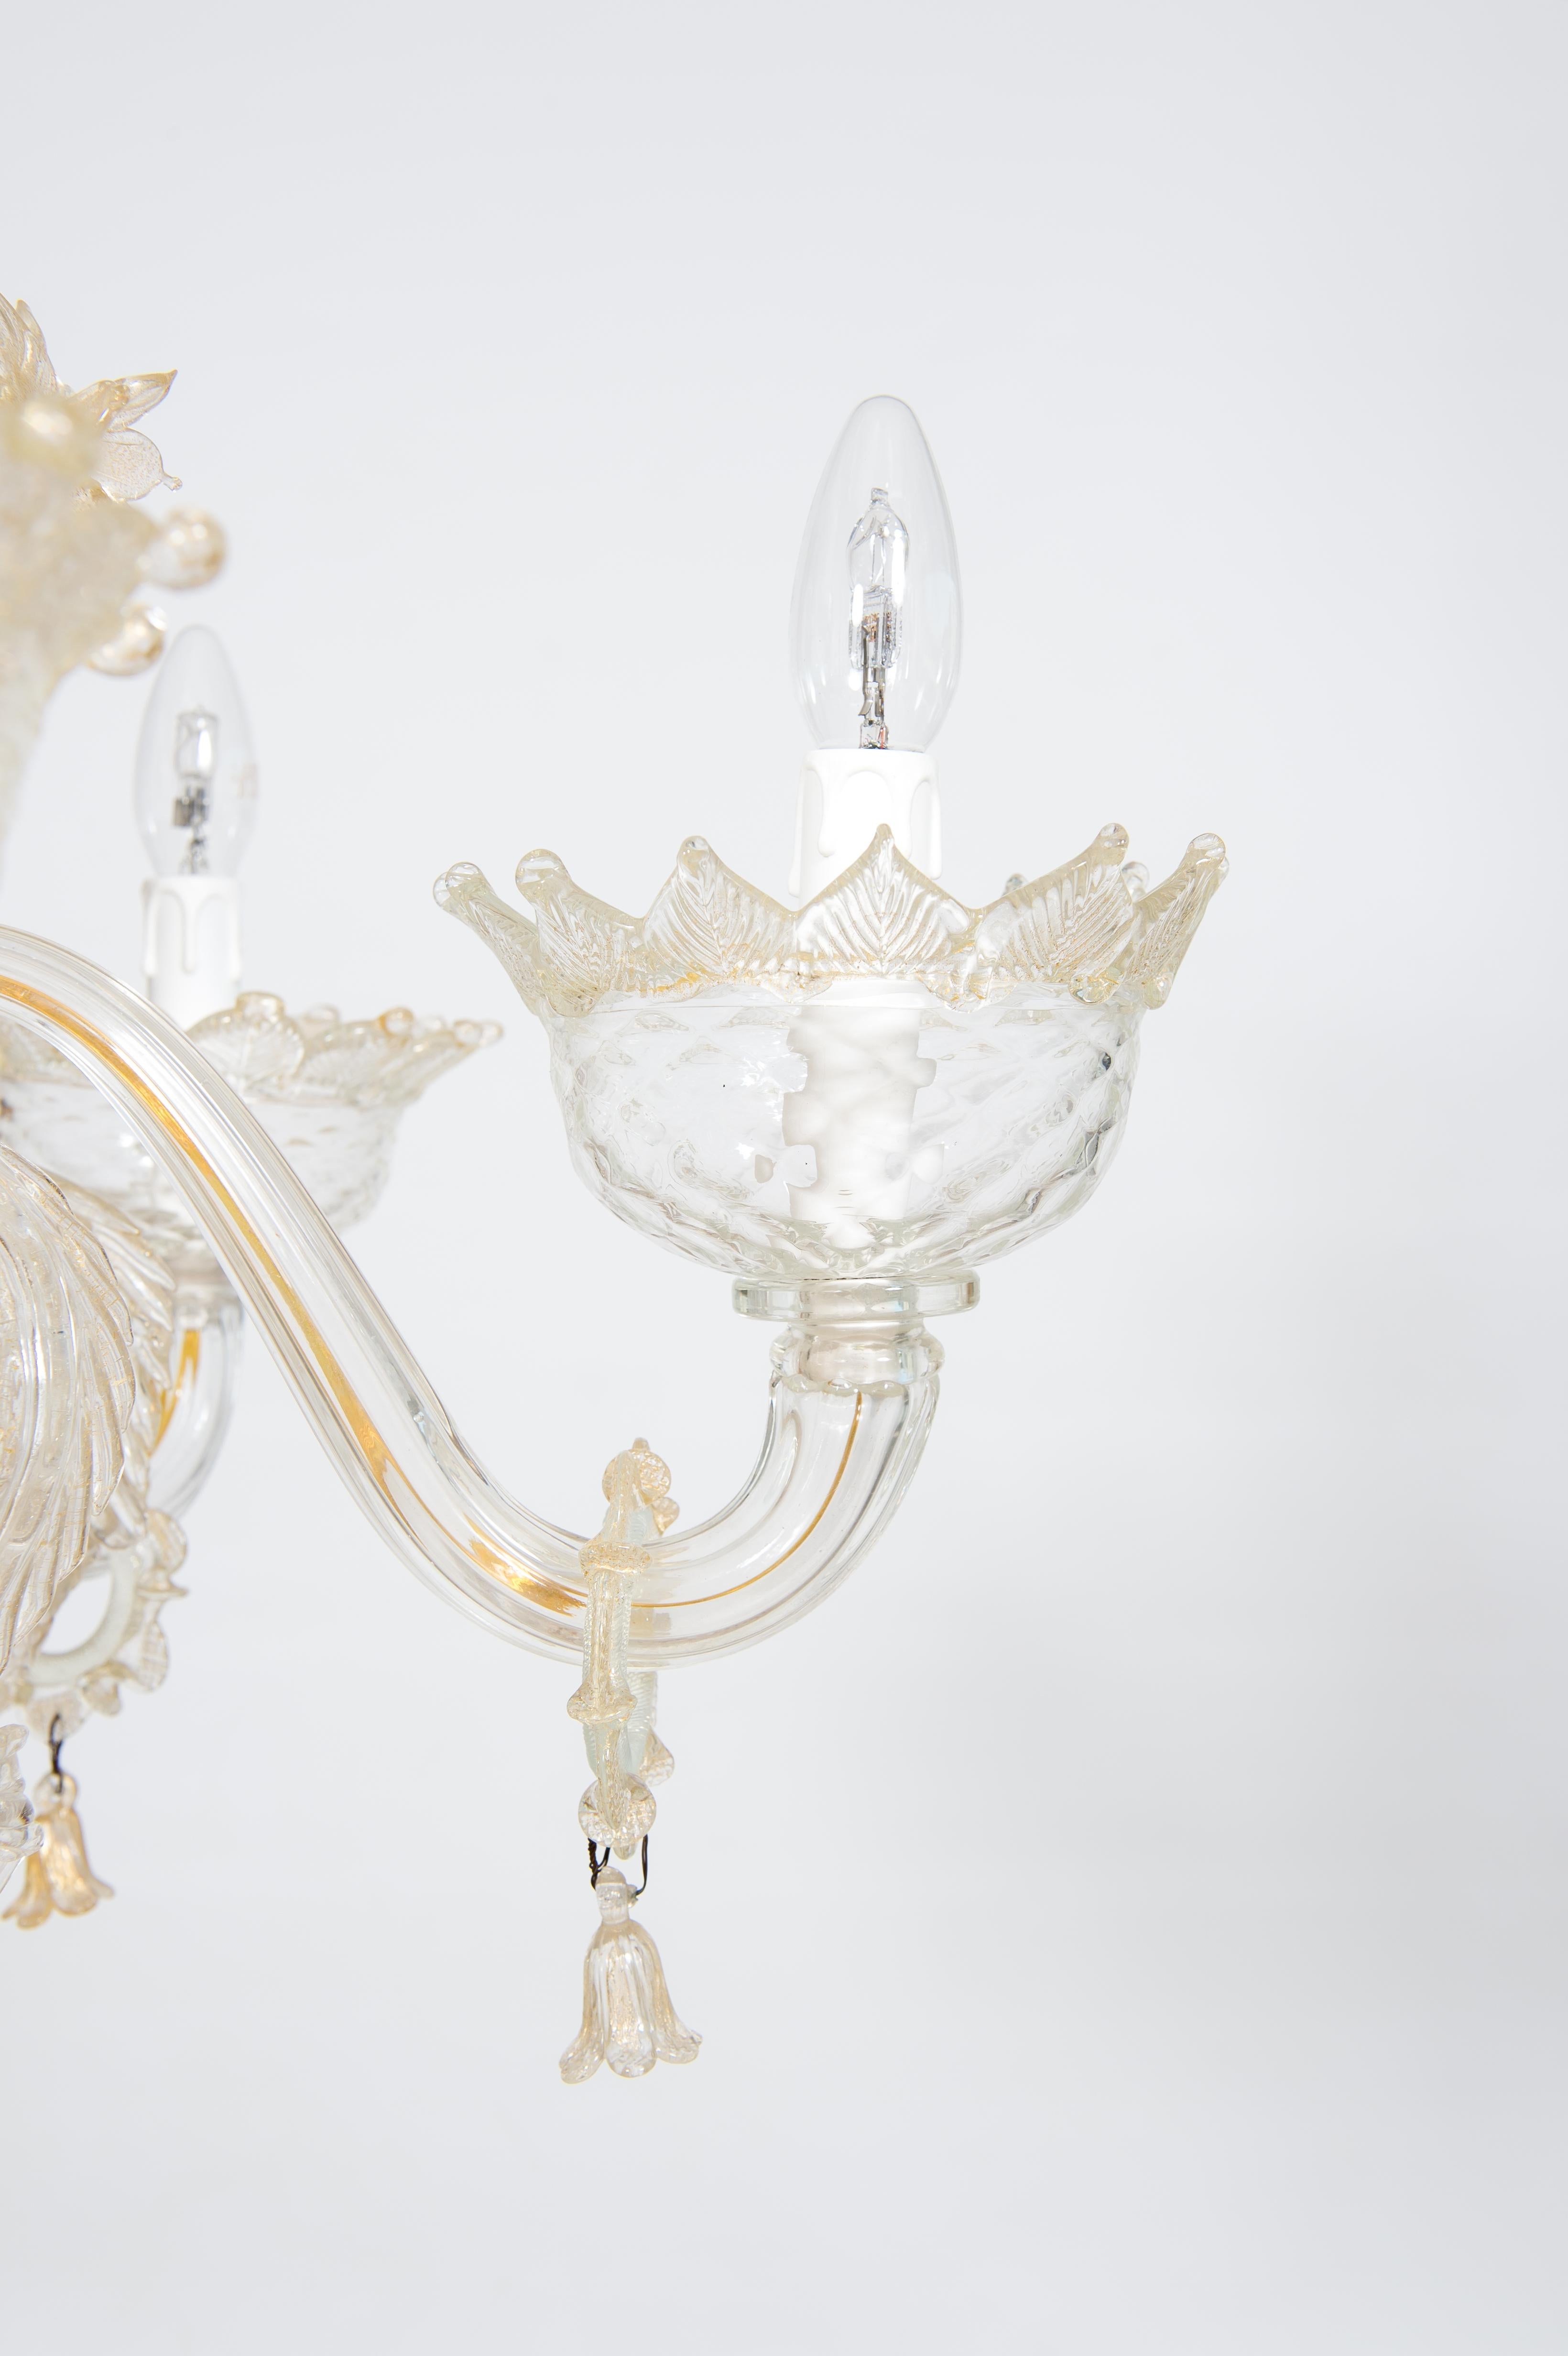 Hand-Crafted Golden Murano Glass Chandelier with “Vere” Decorations, 20th Century, Italy For Sale